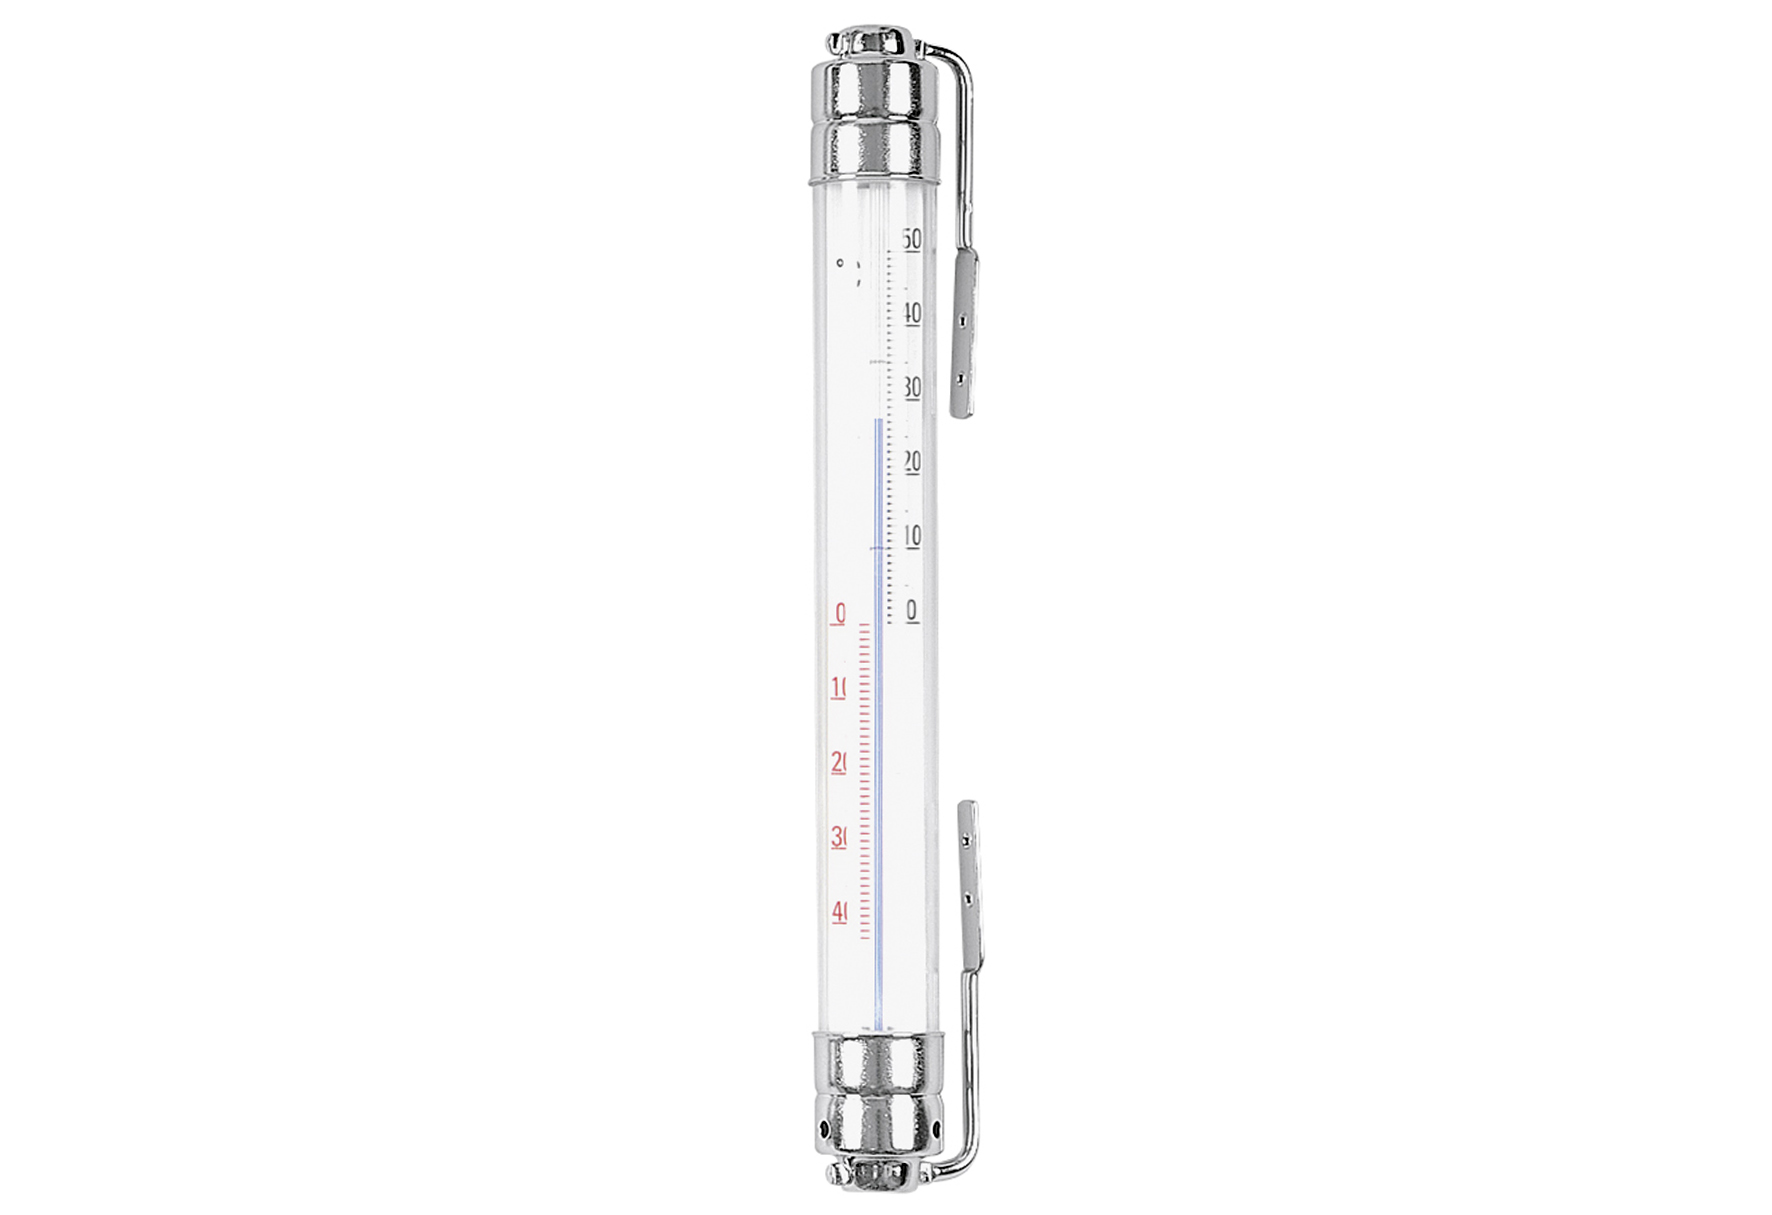 Fenster-Thermometer Metall